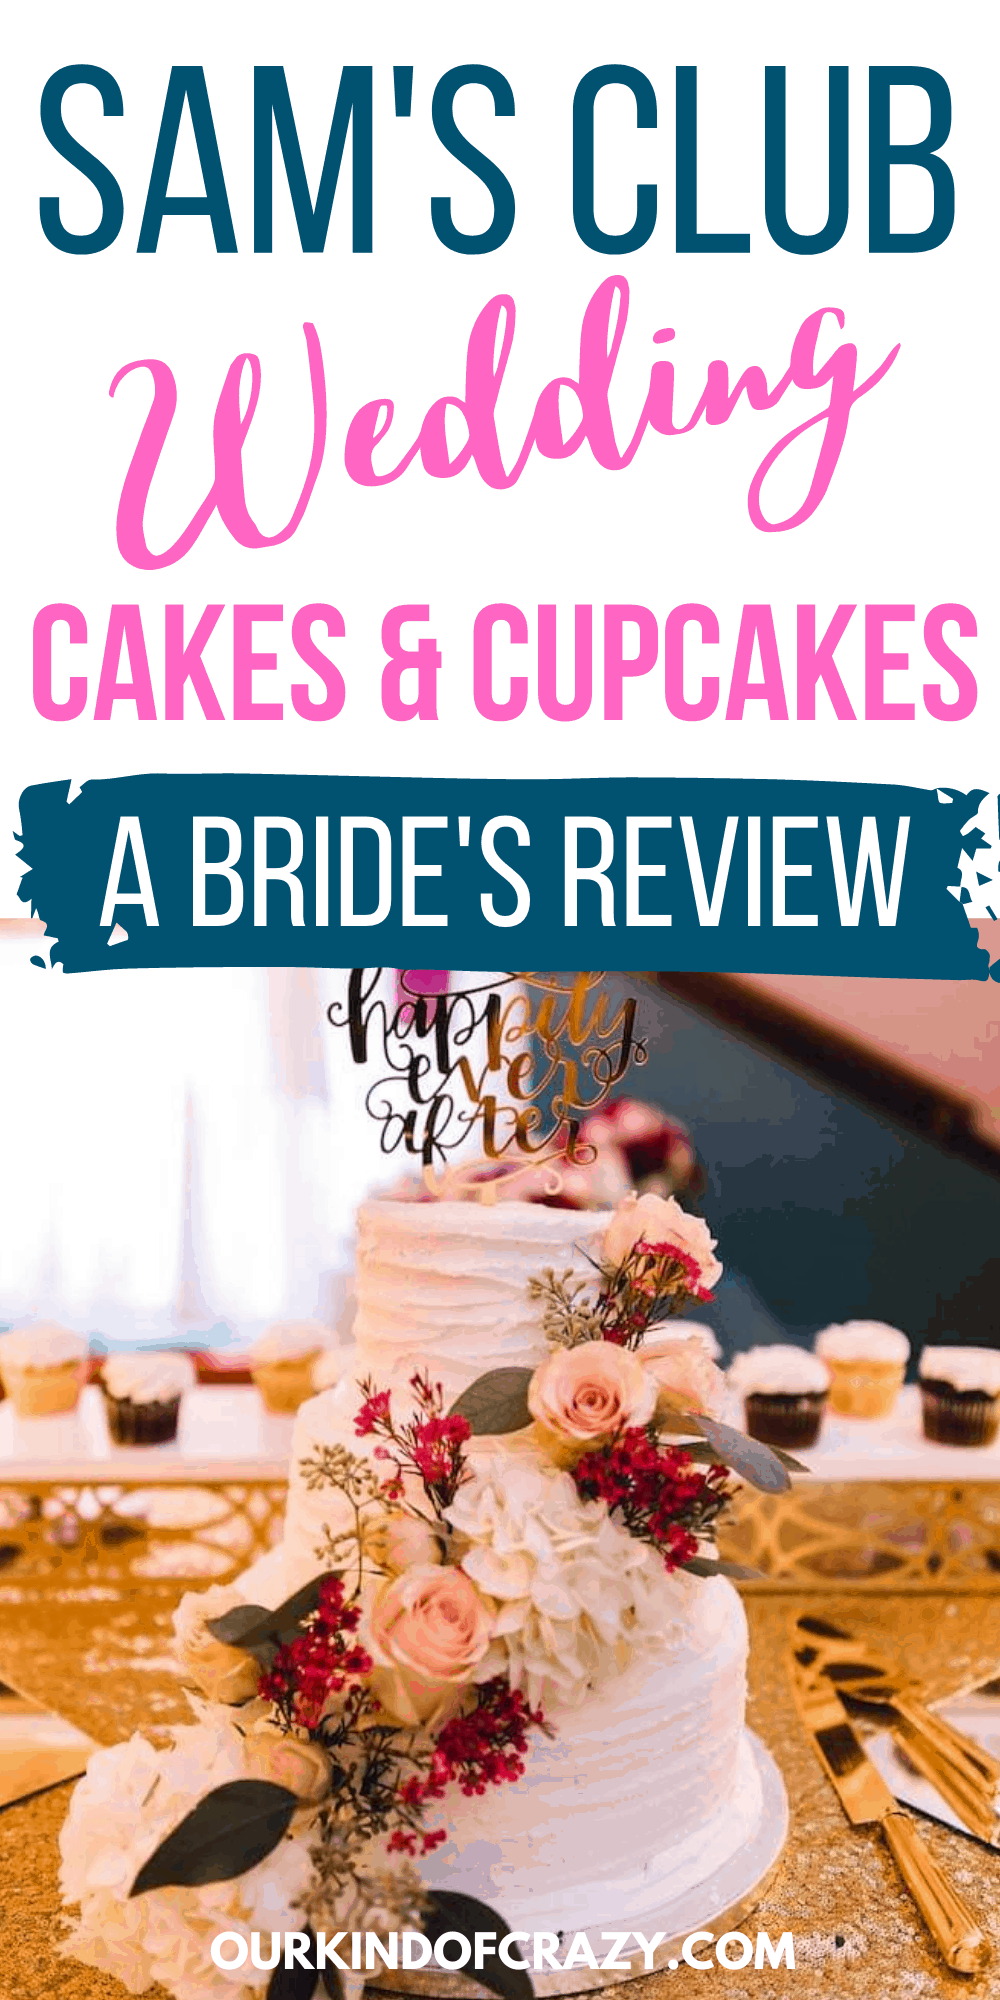 How to Cut Your Wedding Cake Cost in Half | Woman Getting Married